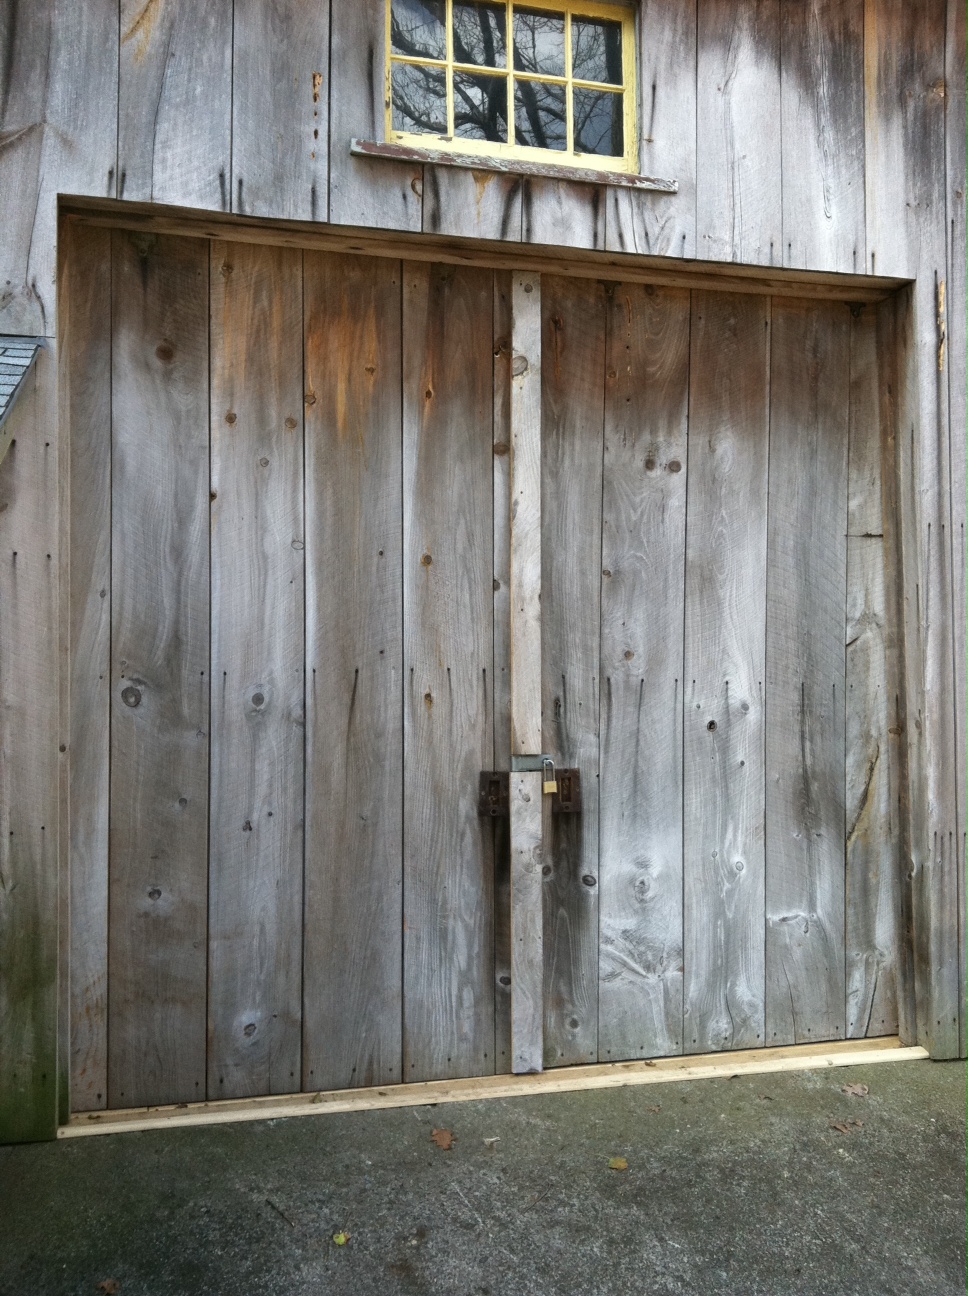 Large Barn Doors For Sale 2015 | Home Design Ideas